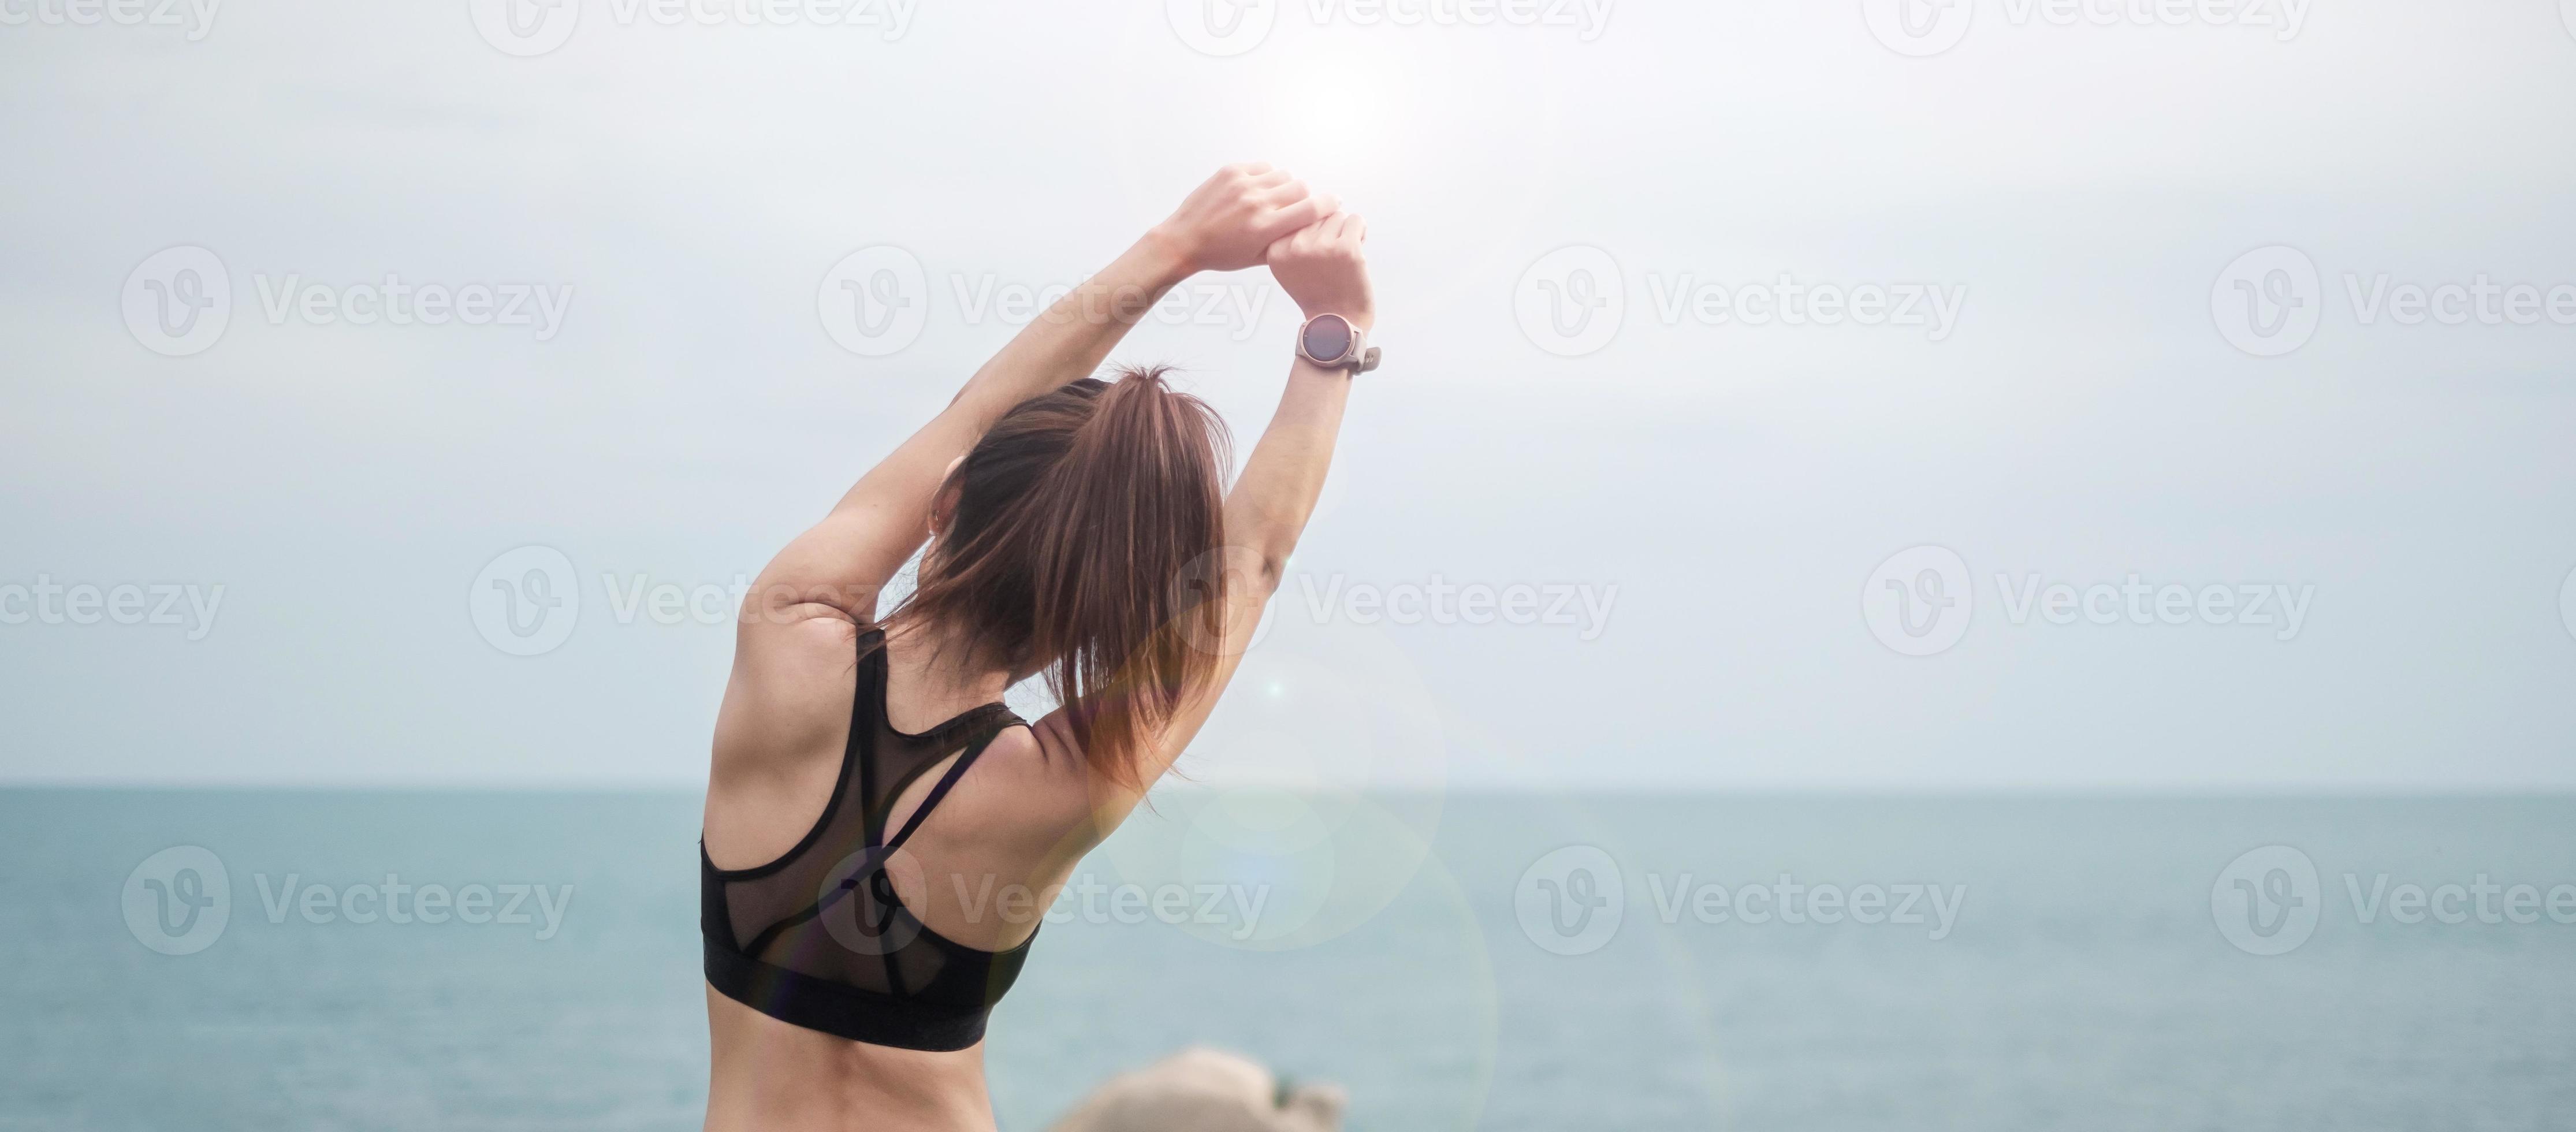 Japans größter Young fitness female in sportswear in and wellness Stock Vecteezy body against stretching woman exercise at morning. Workout, work 9173650 concepts view, ocean balance Photo life healthy